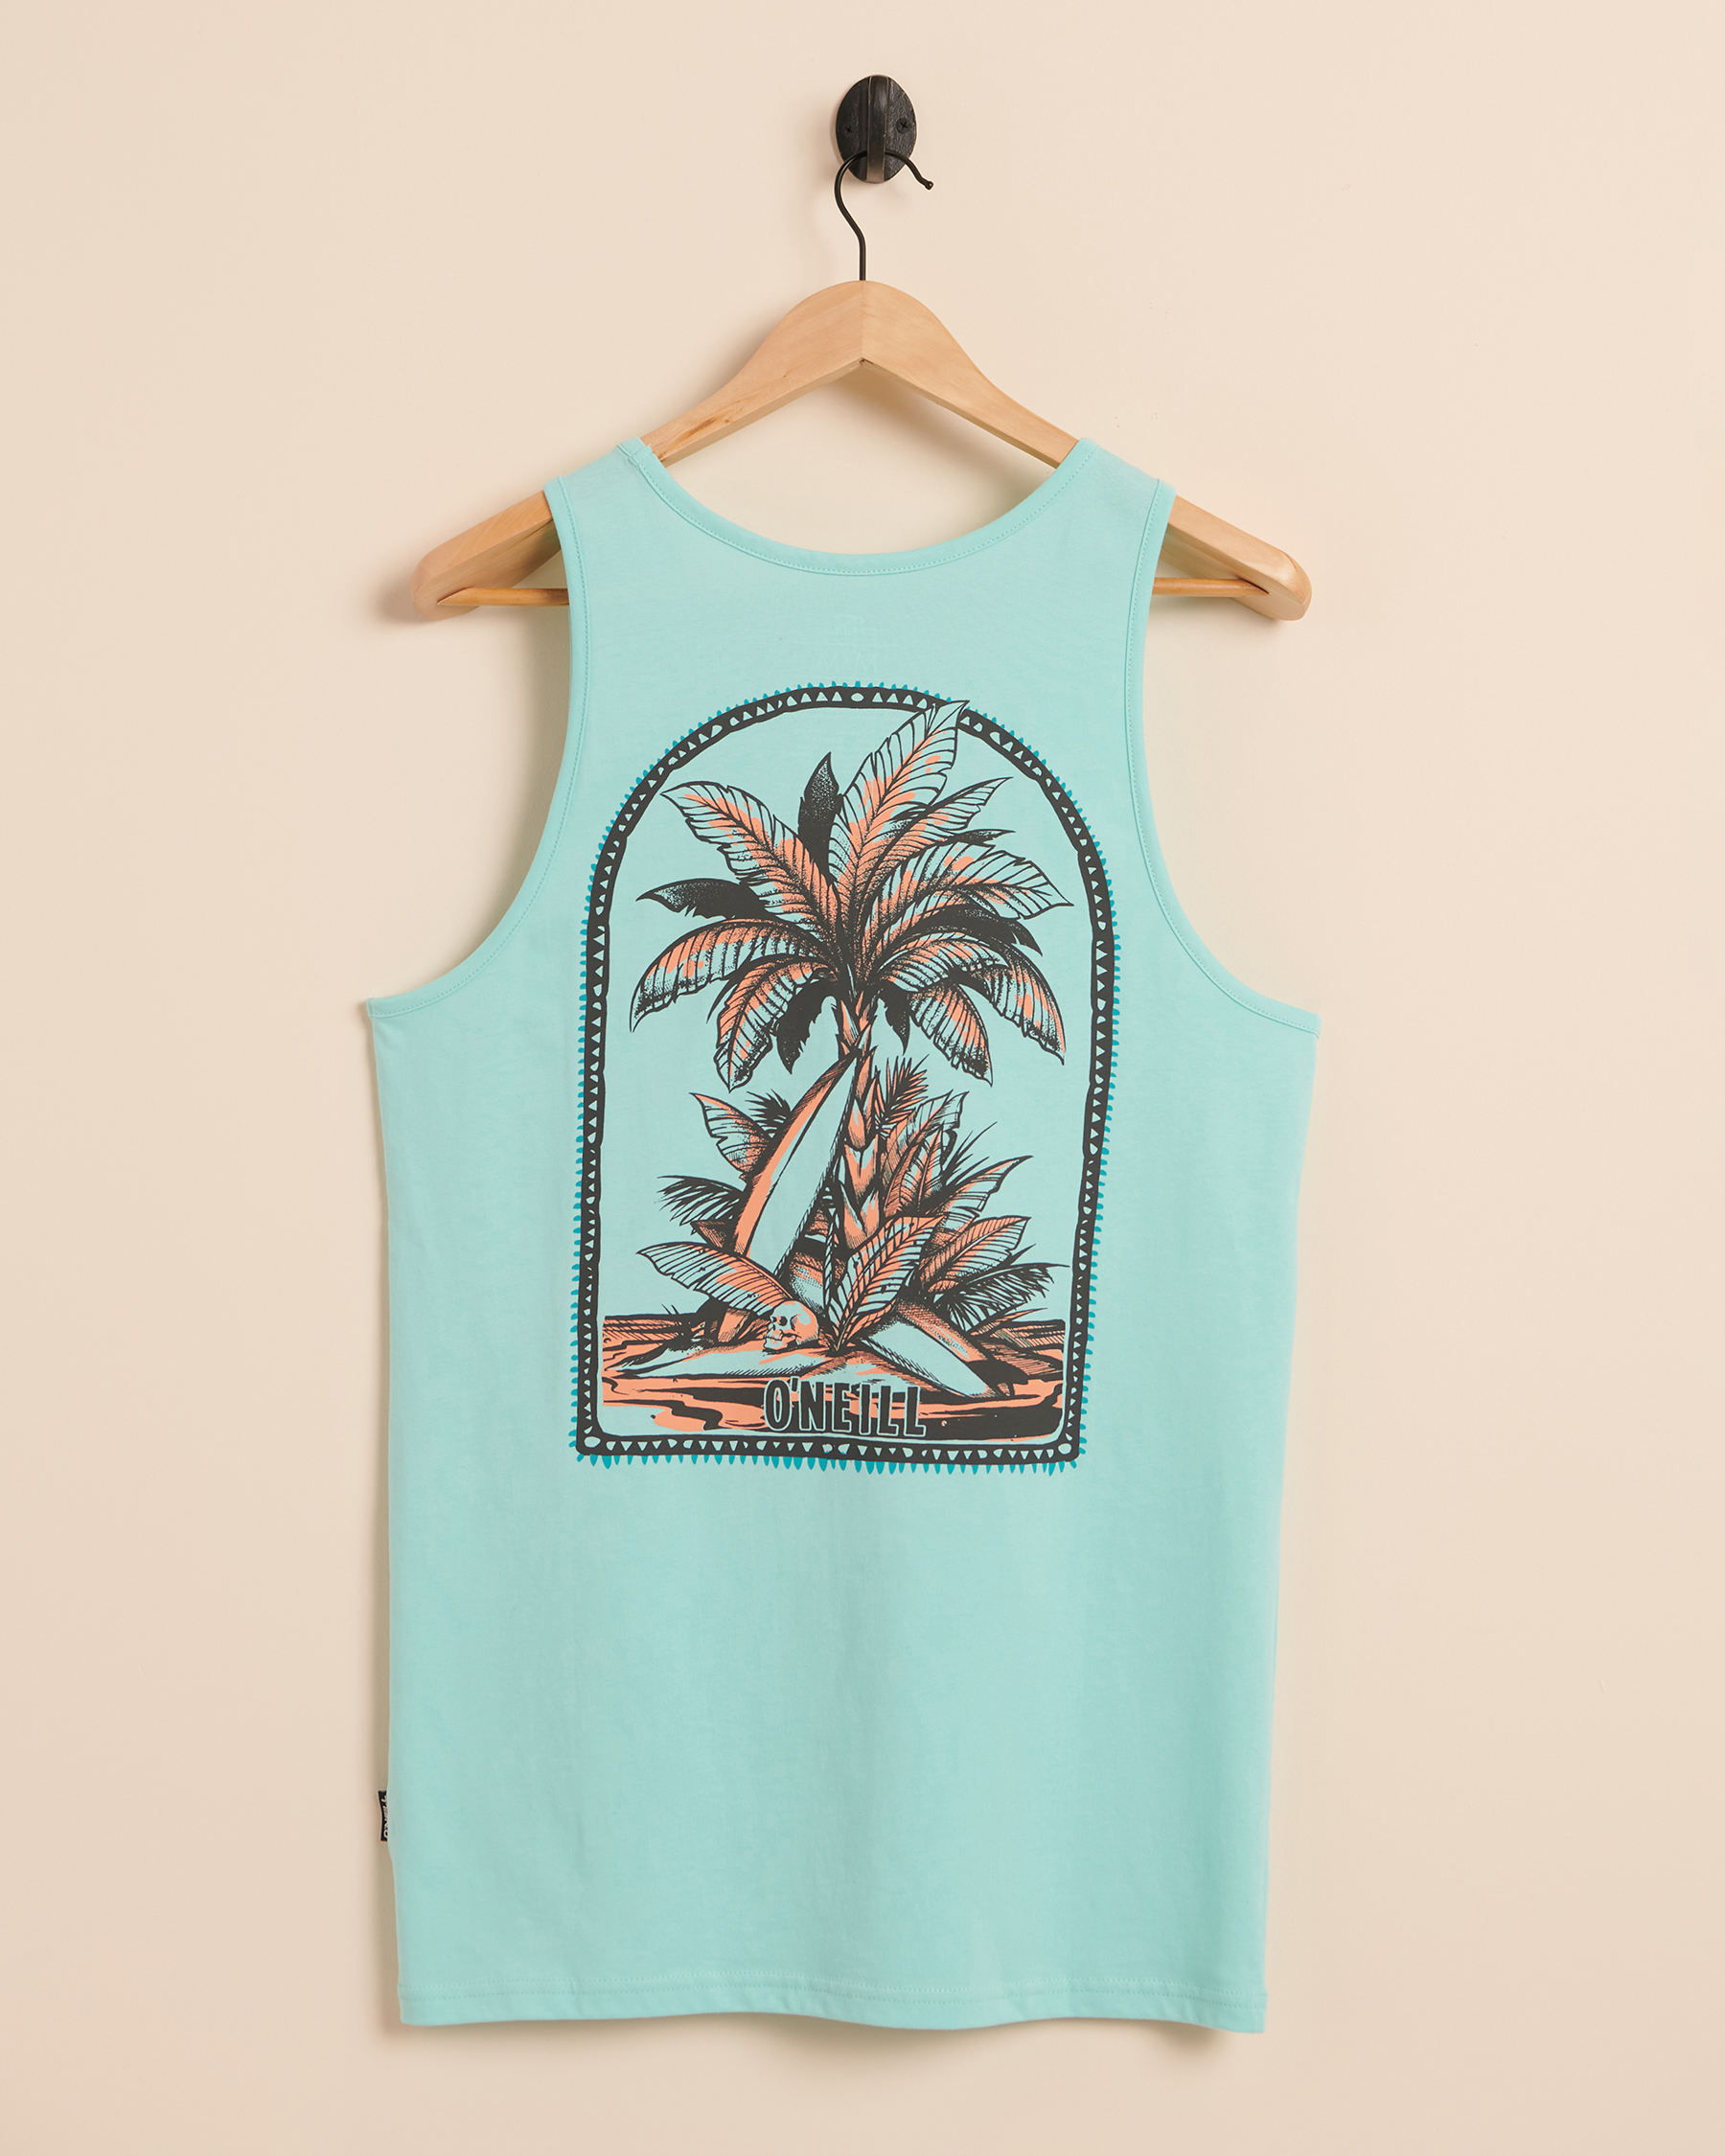 O'NEILL Castoff Tank Top Turquoise SU3118211 - View2